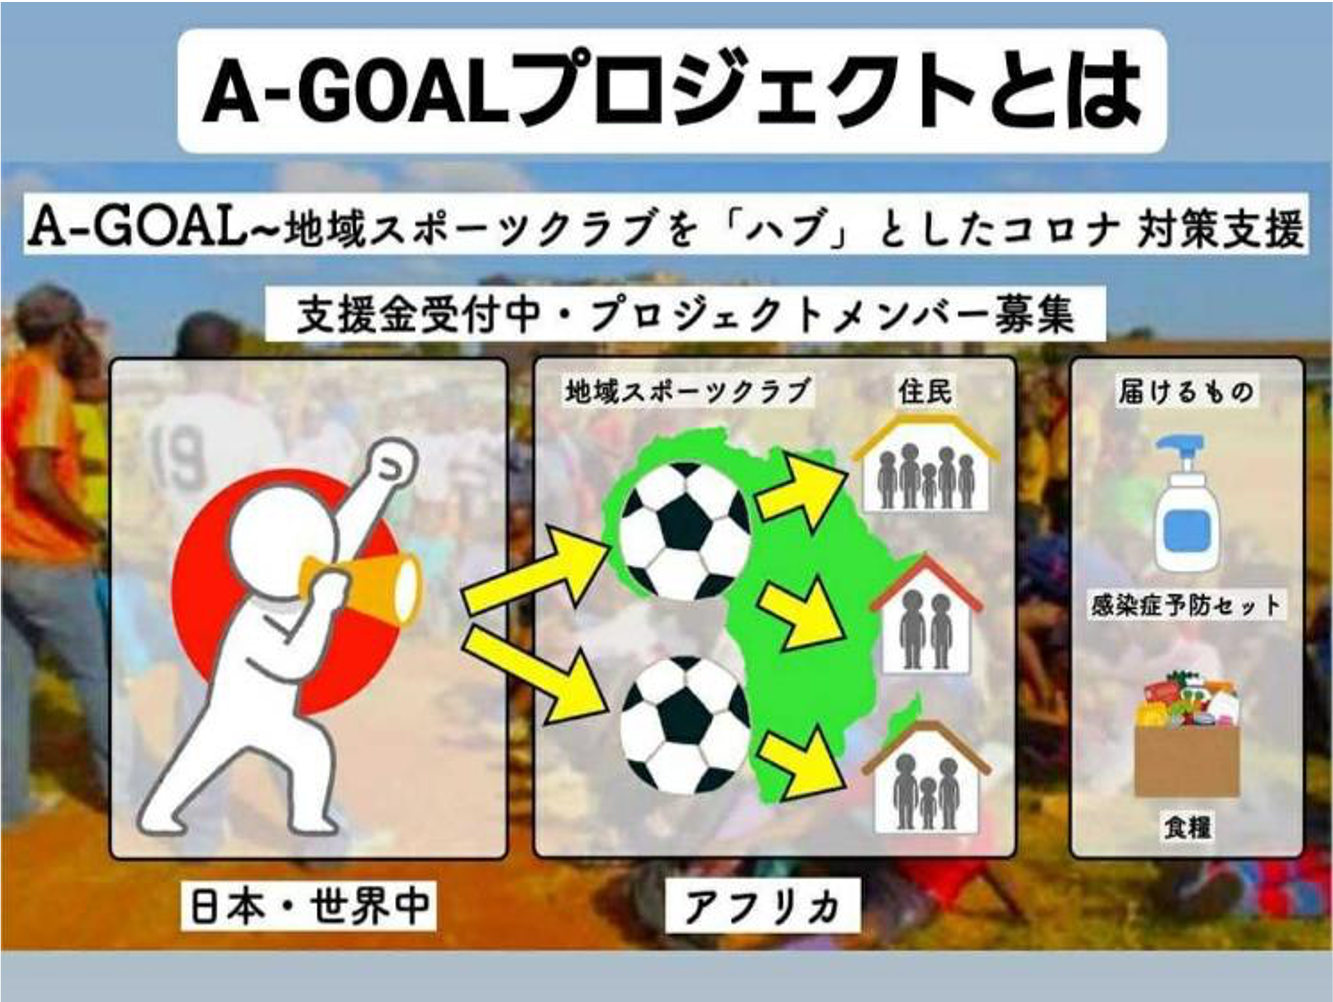 A-GOAL Project 2020-20214